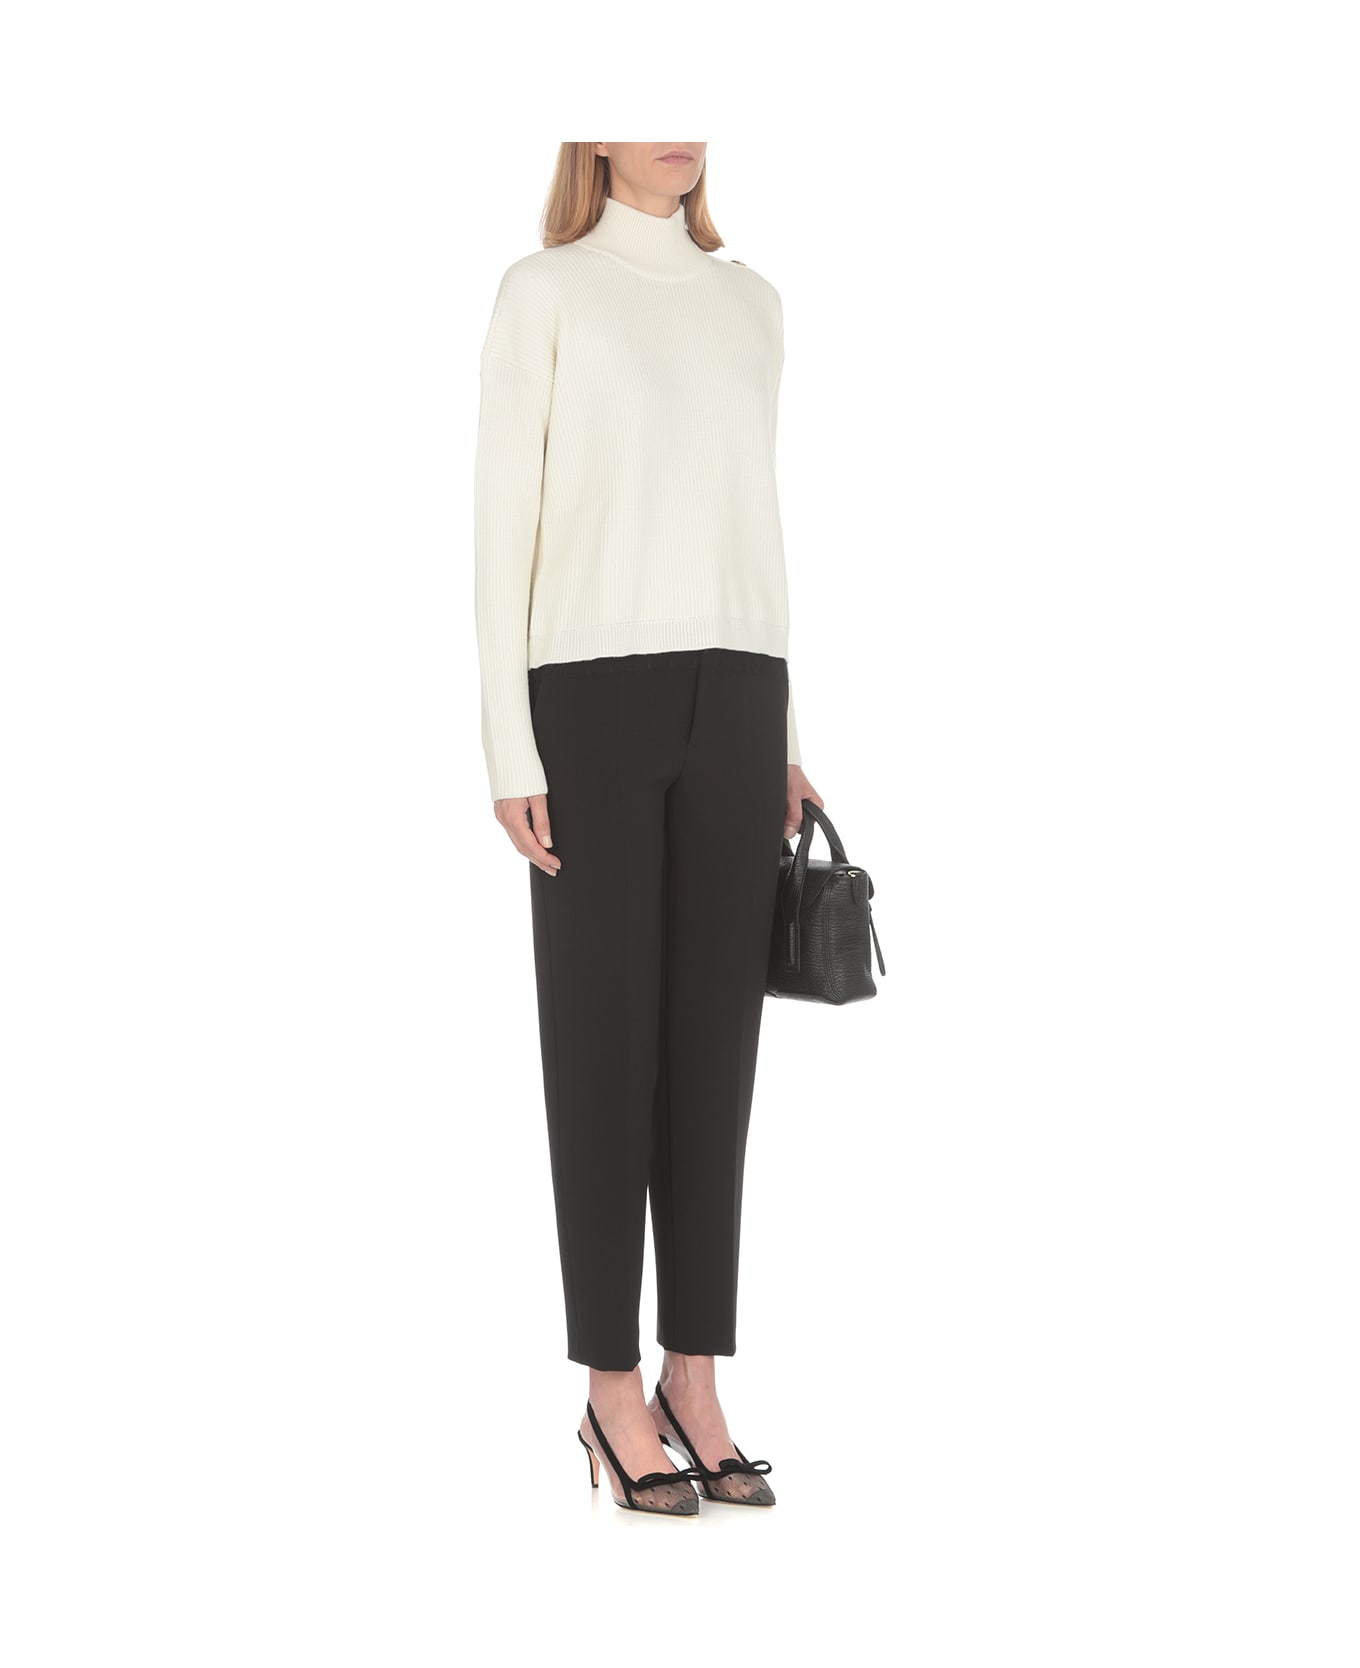 RED Valentino White Sweater With Buttons And Tulle Point D'esprit - White